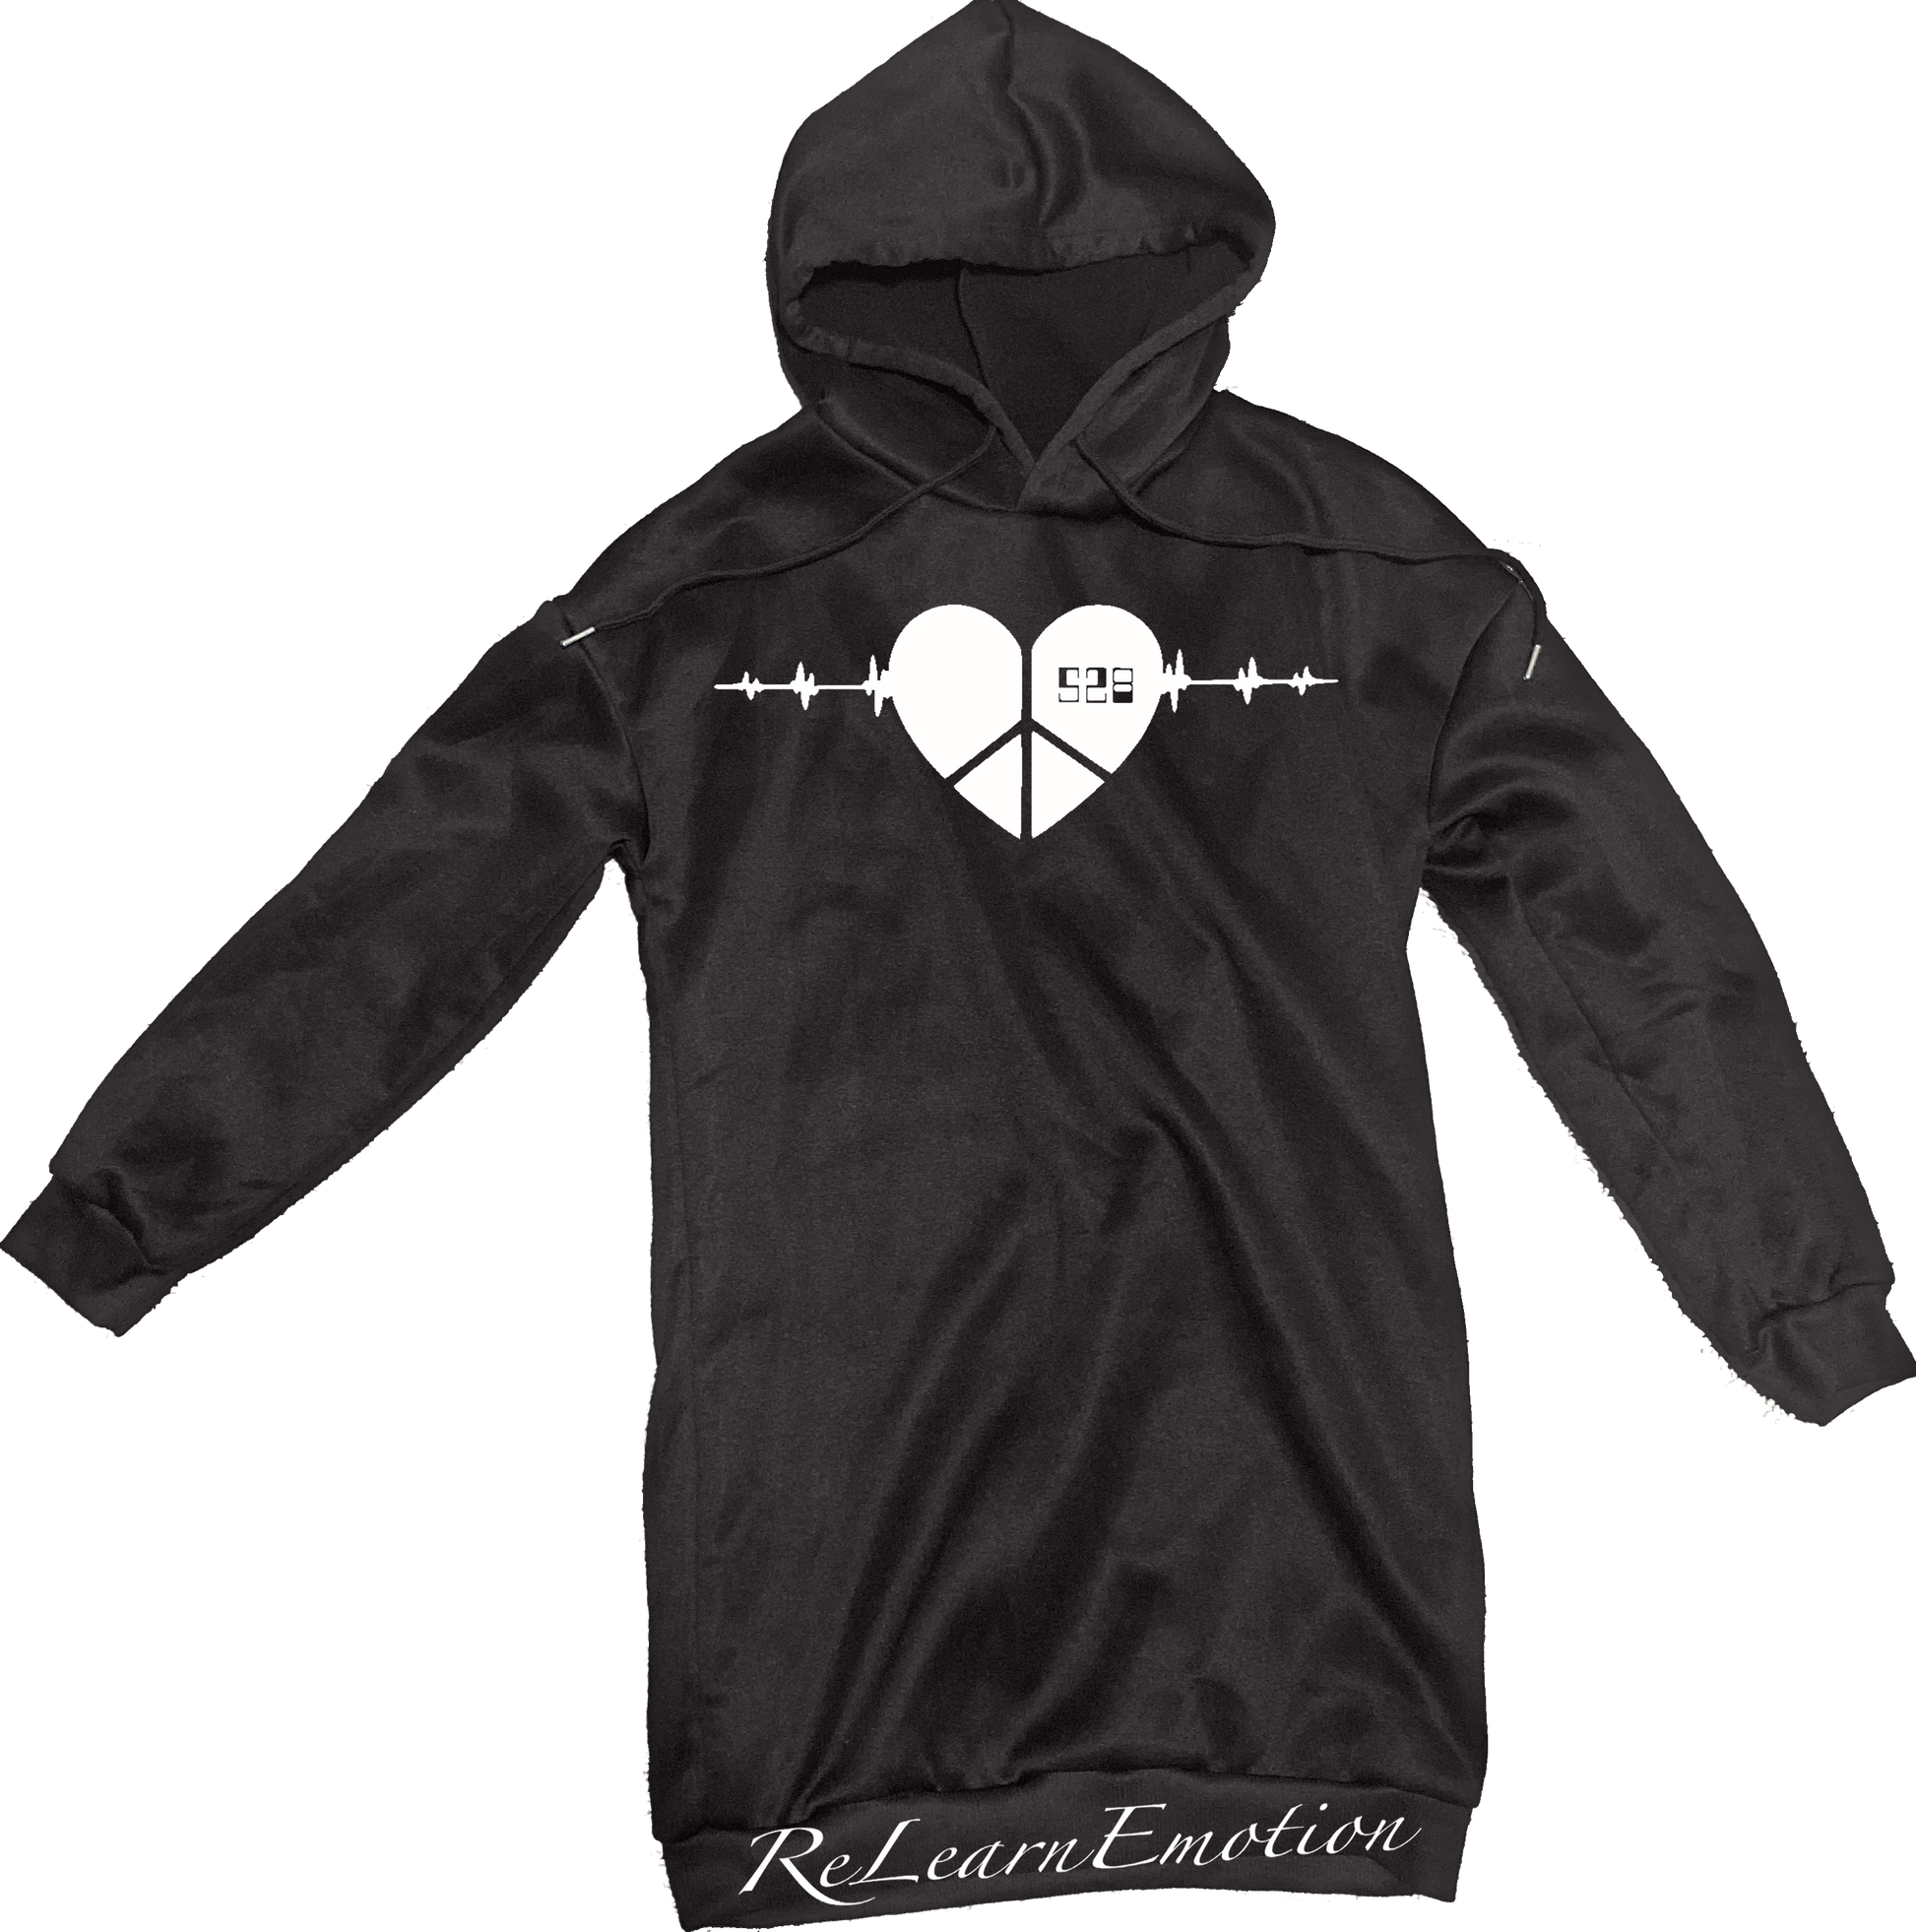 pitch black long sleeve GSMUV hoodie dress with white 528 Alignmix Relearn Emotion logo with a heart and peace and love sign inside of the heart with volume frequencies coming from the sides of the heart.